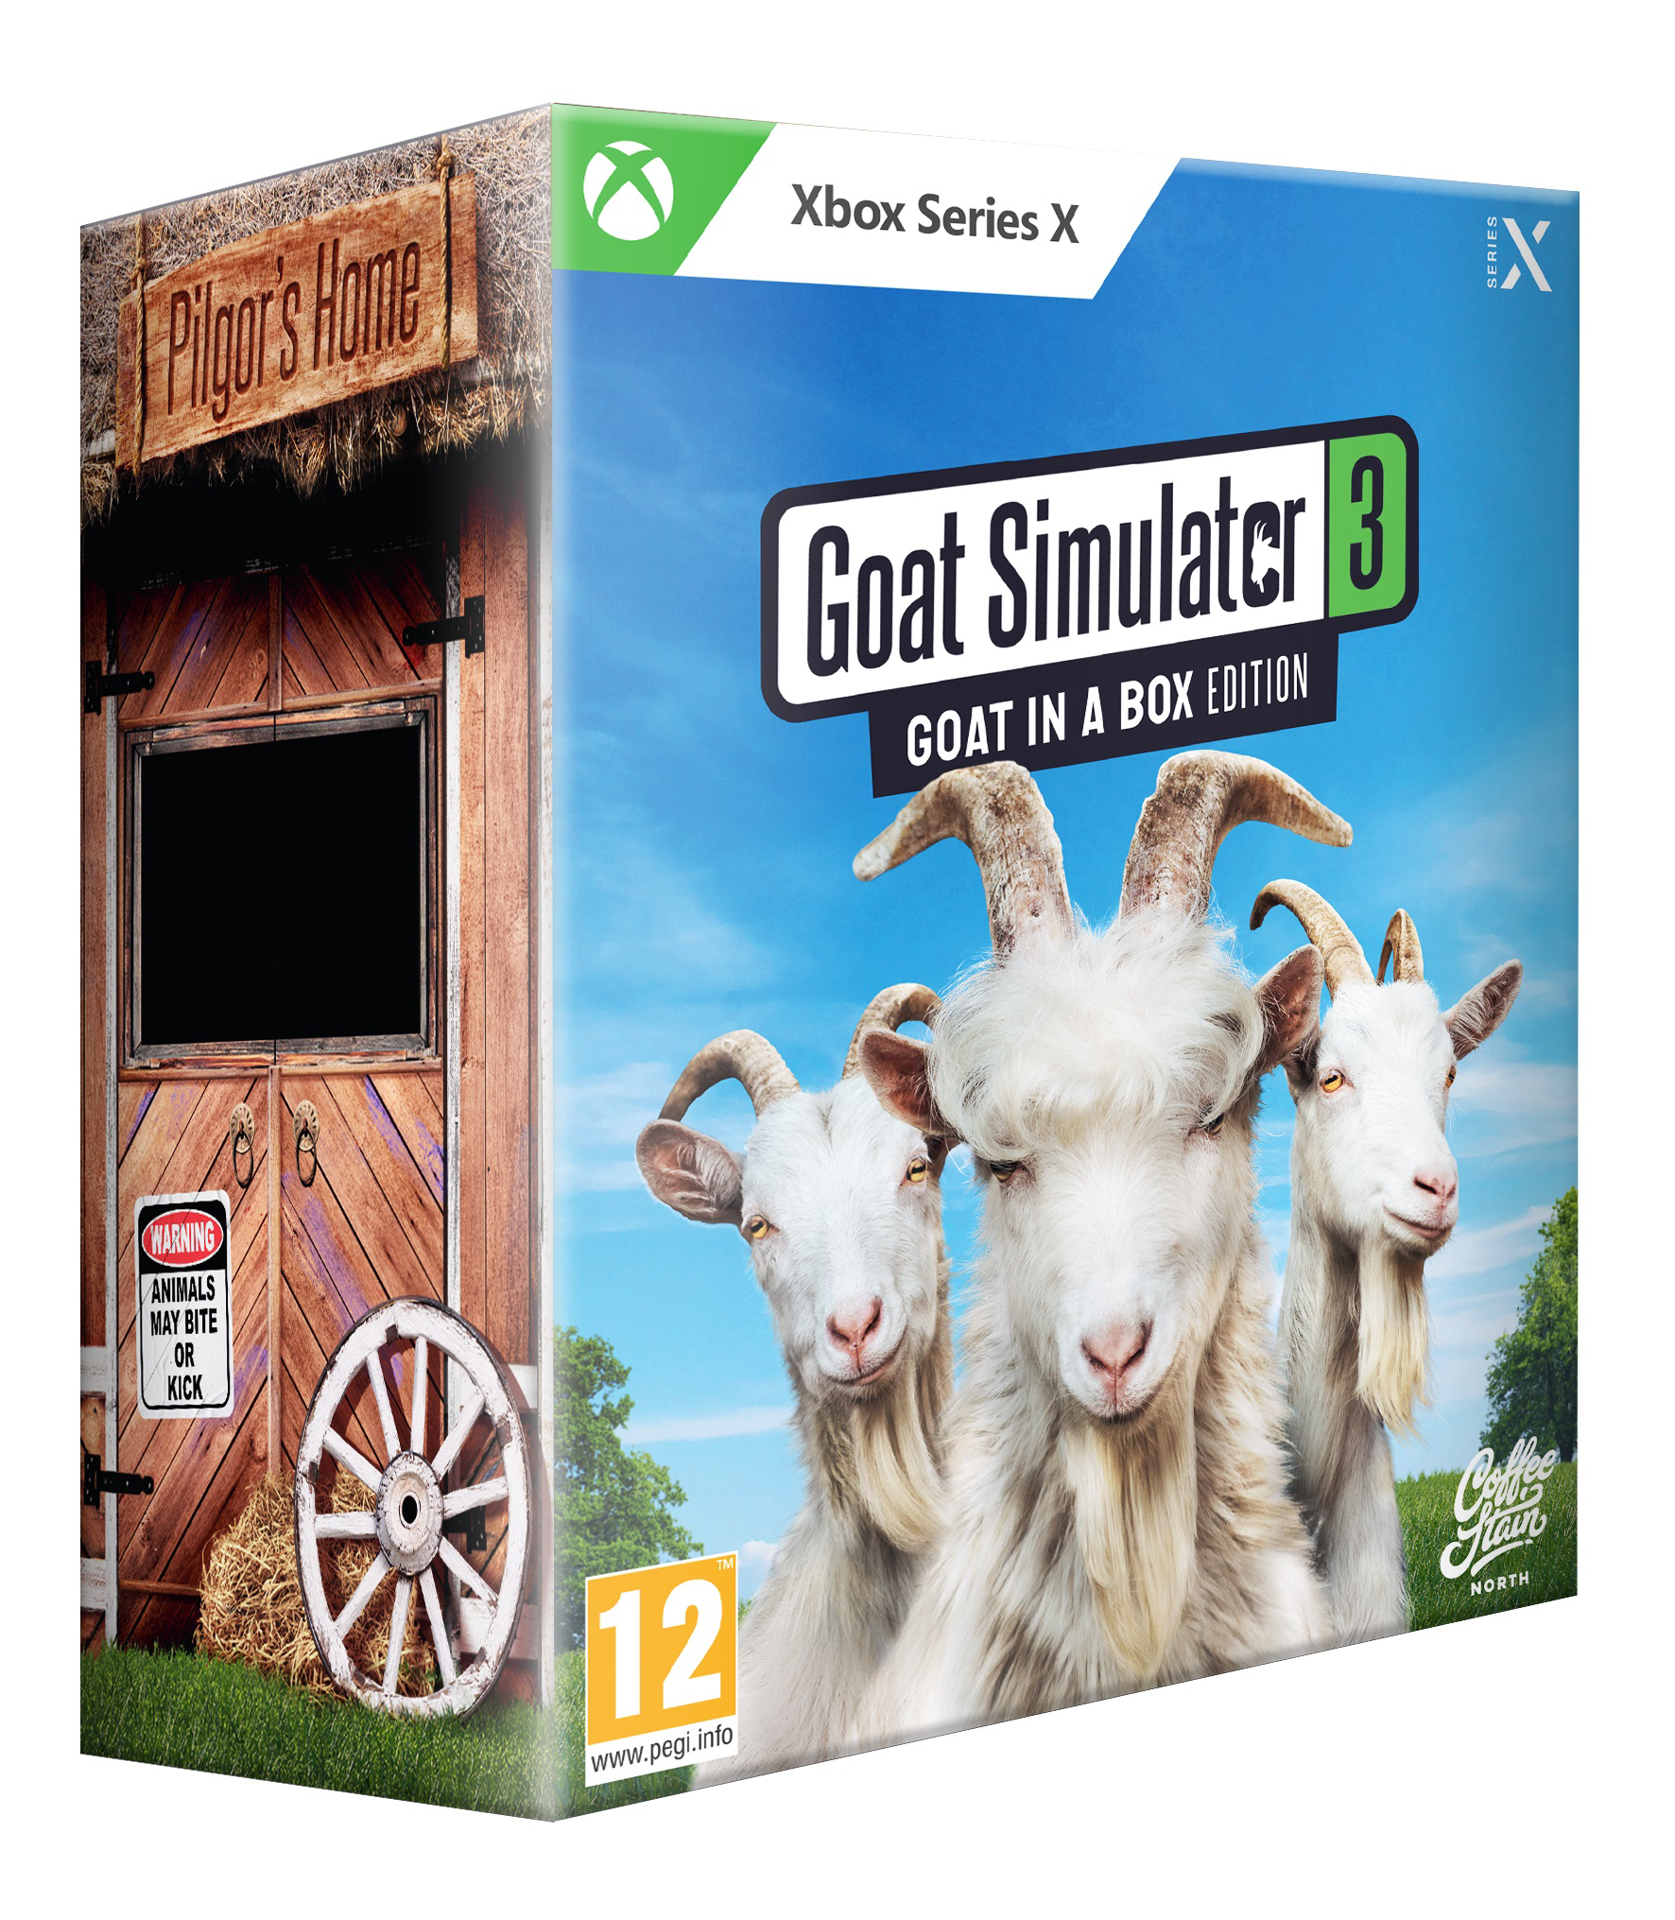 Goat Simulator 3 - Goat in a Box Collector's Edition